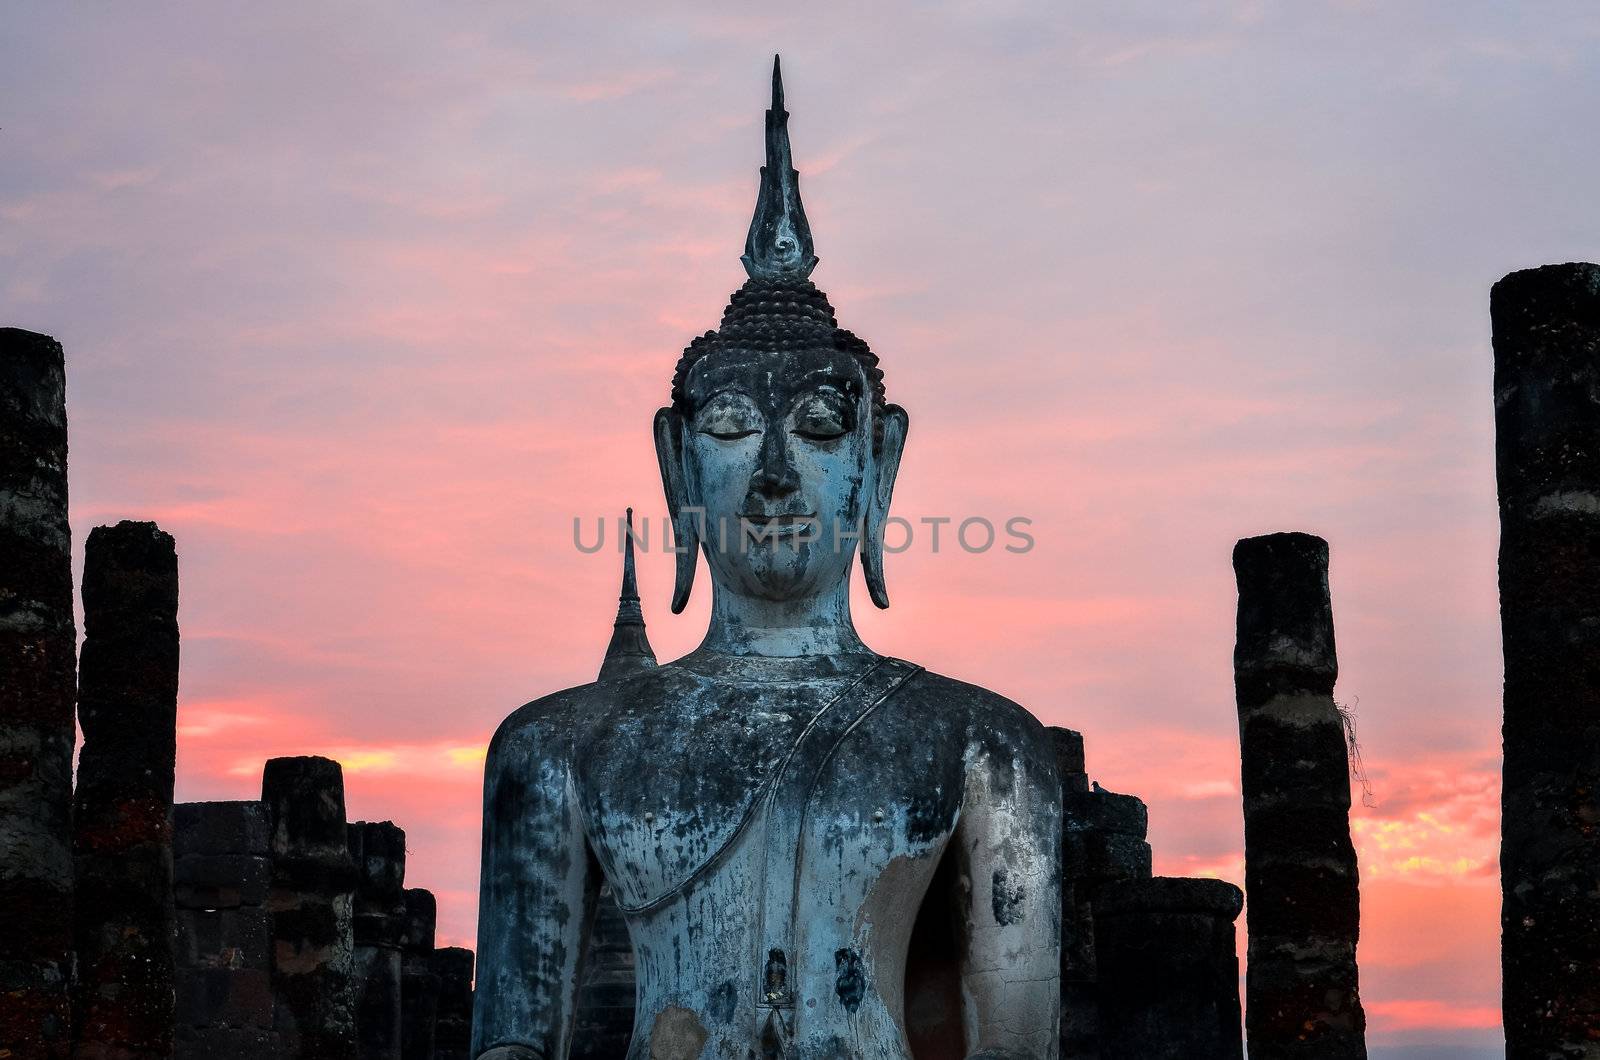 Detail of sitting Buddha at sunset in Sukhothai, Thailand by martinm303